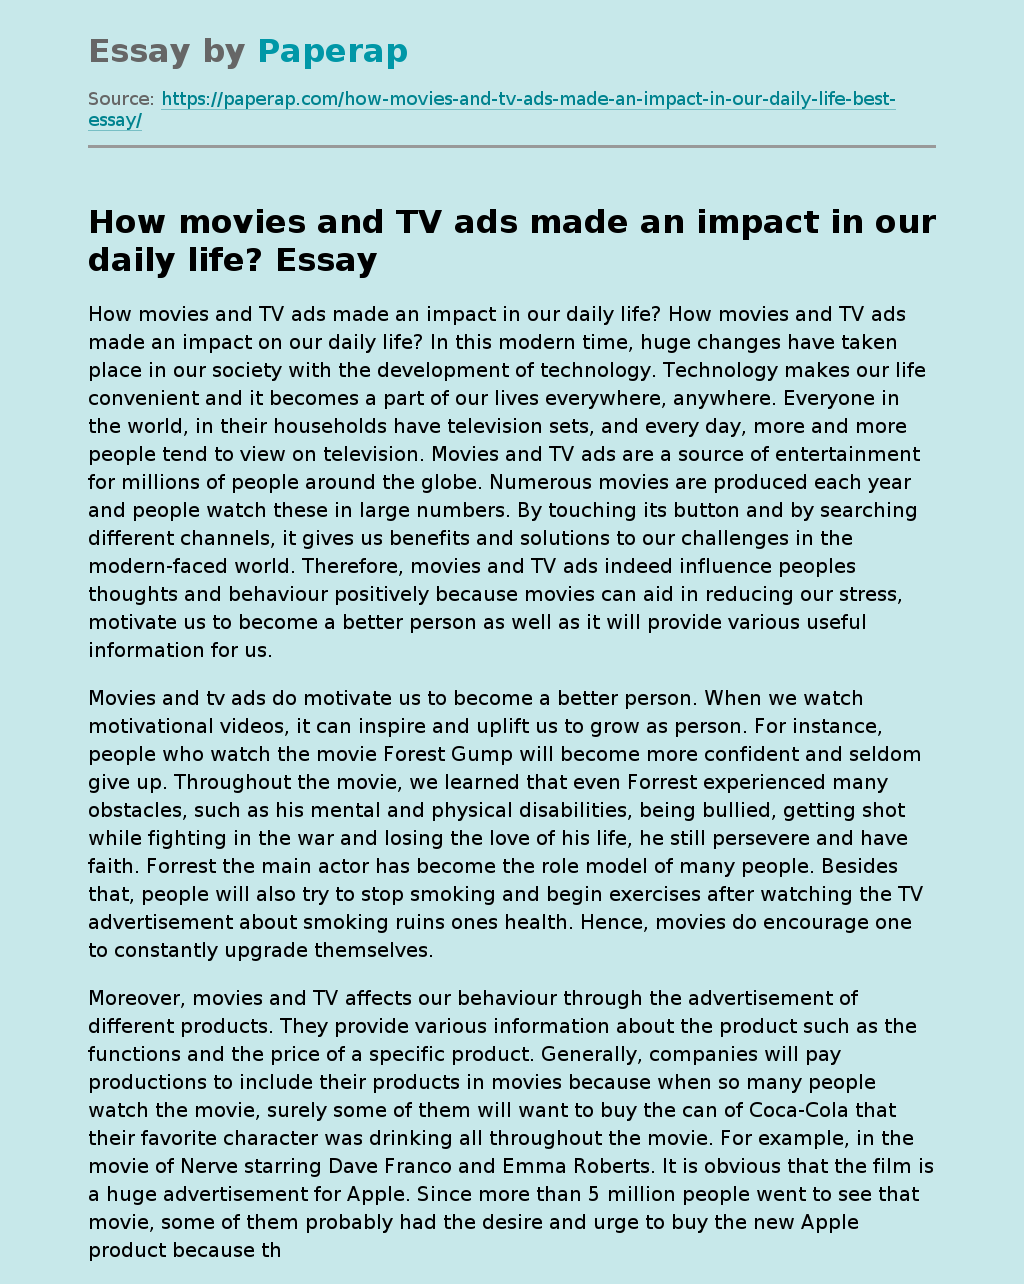 How movies and TV ads made an impact in our daily life?